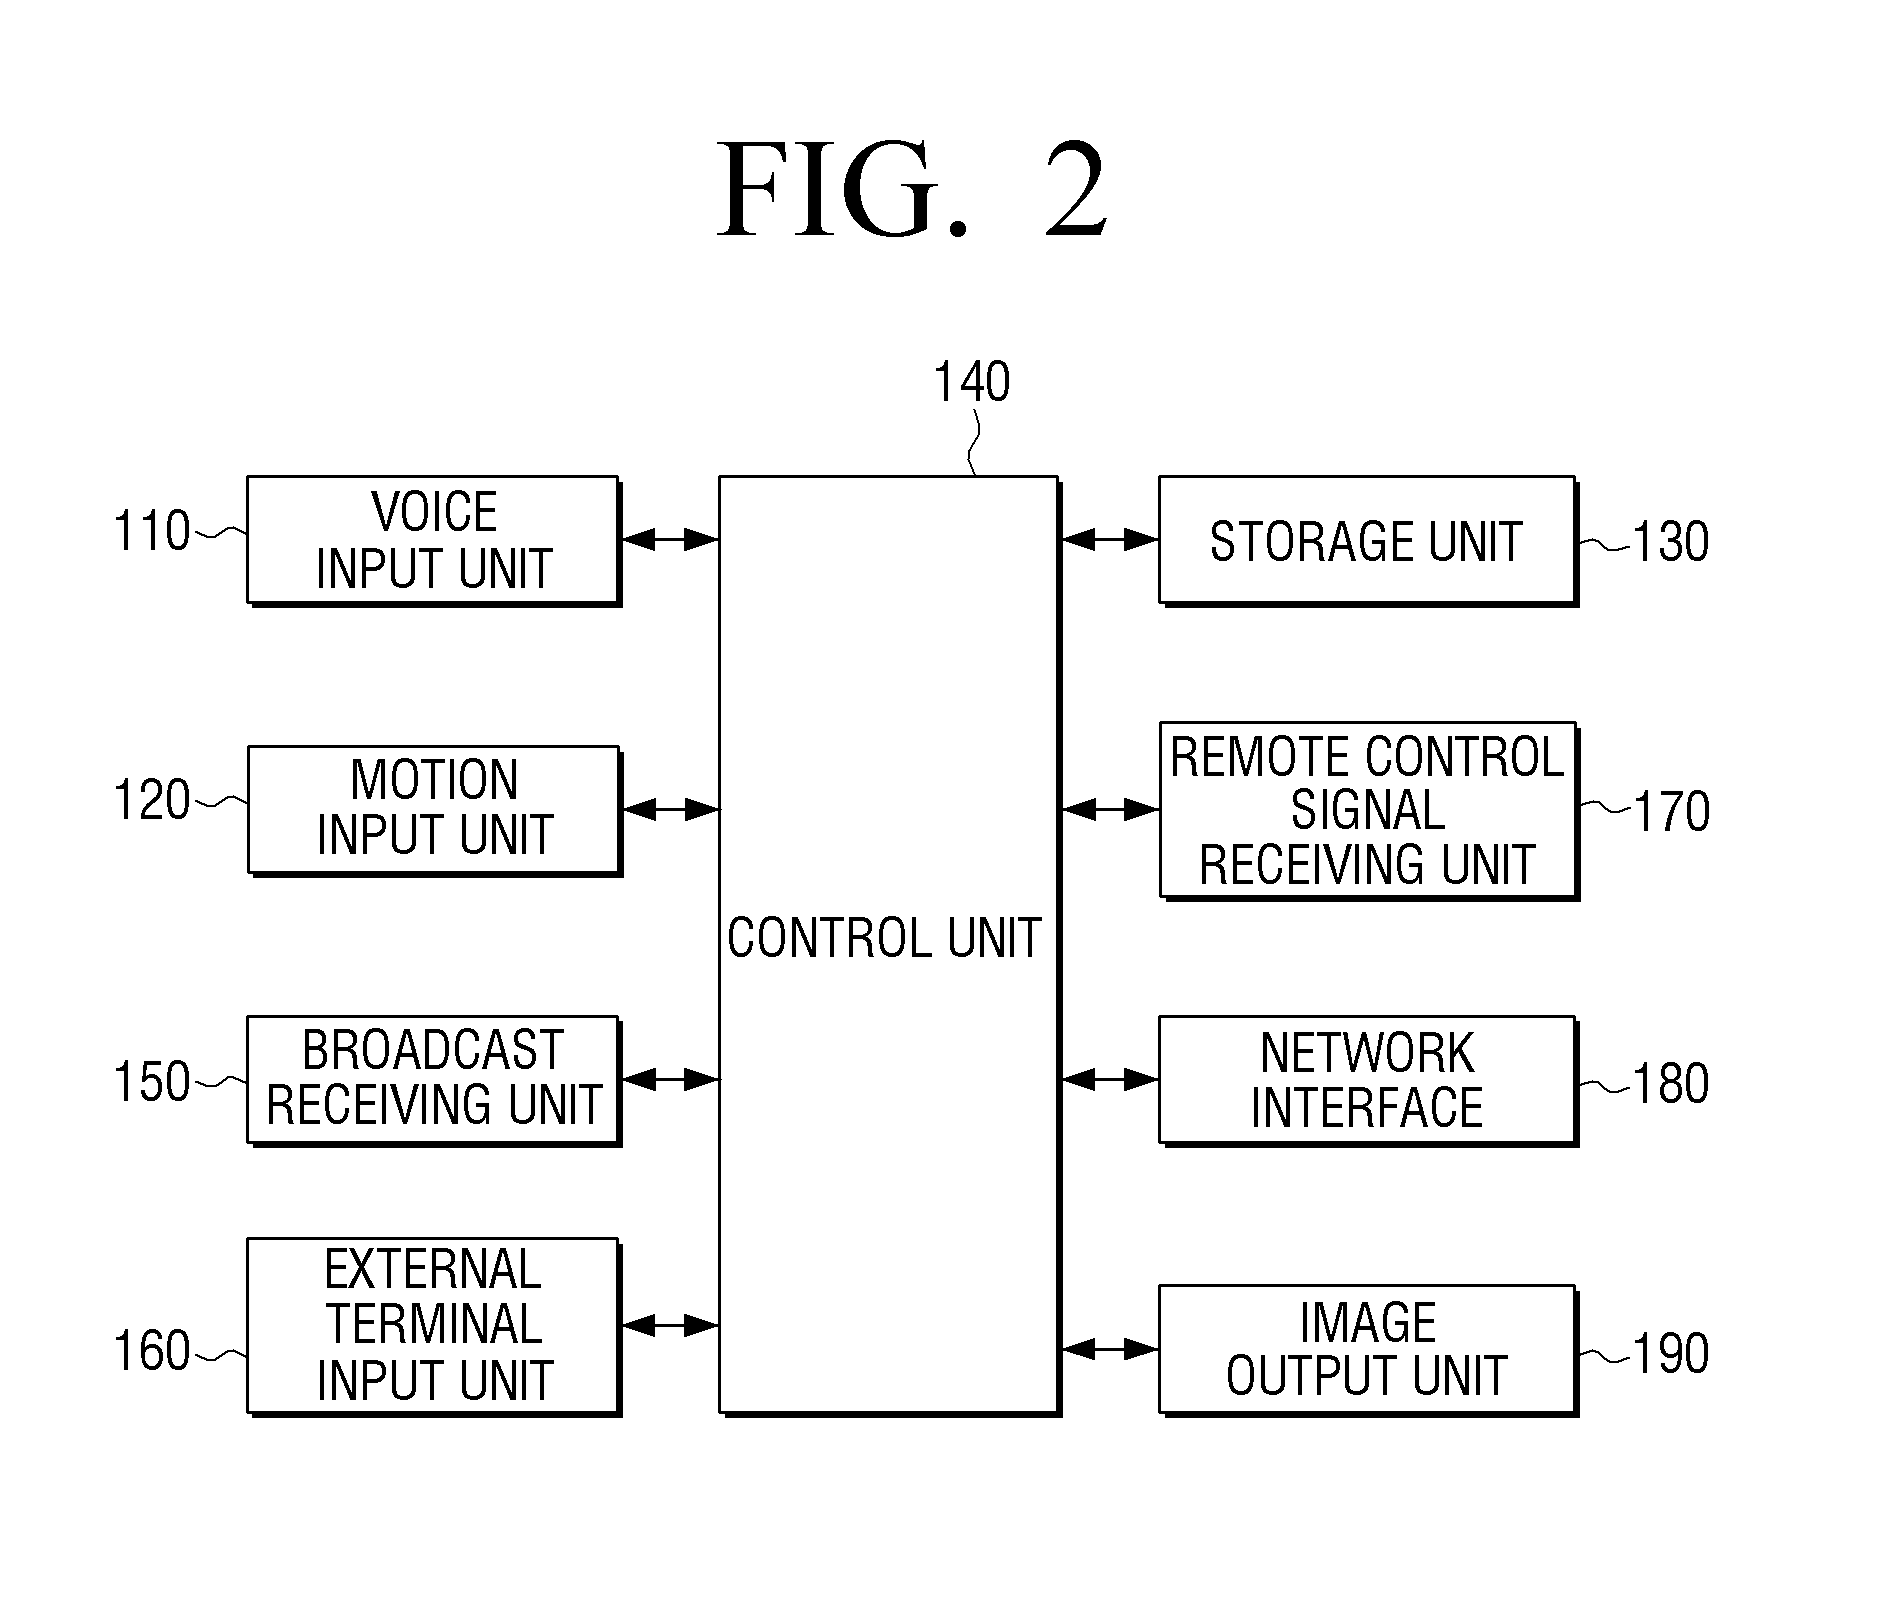 Method for controlling electronic apparatus based on voice recognition and motion recognition, and electronic apparatus applying the same